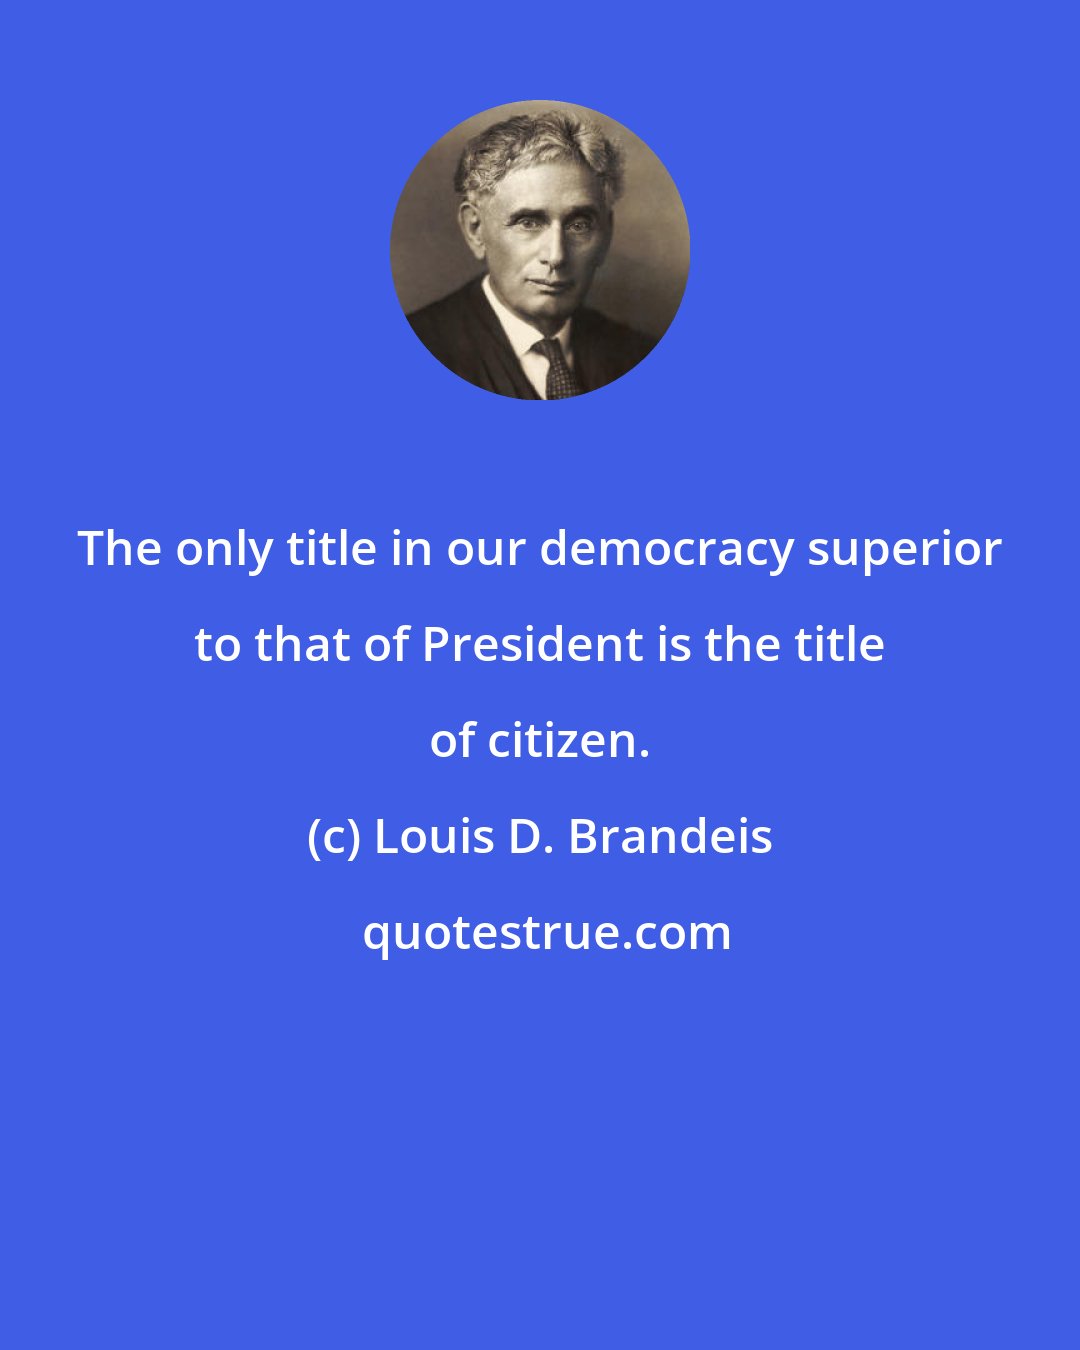 Louis D. Brandeis: The only title in our democracy superior to that of President is the title of citizen.